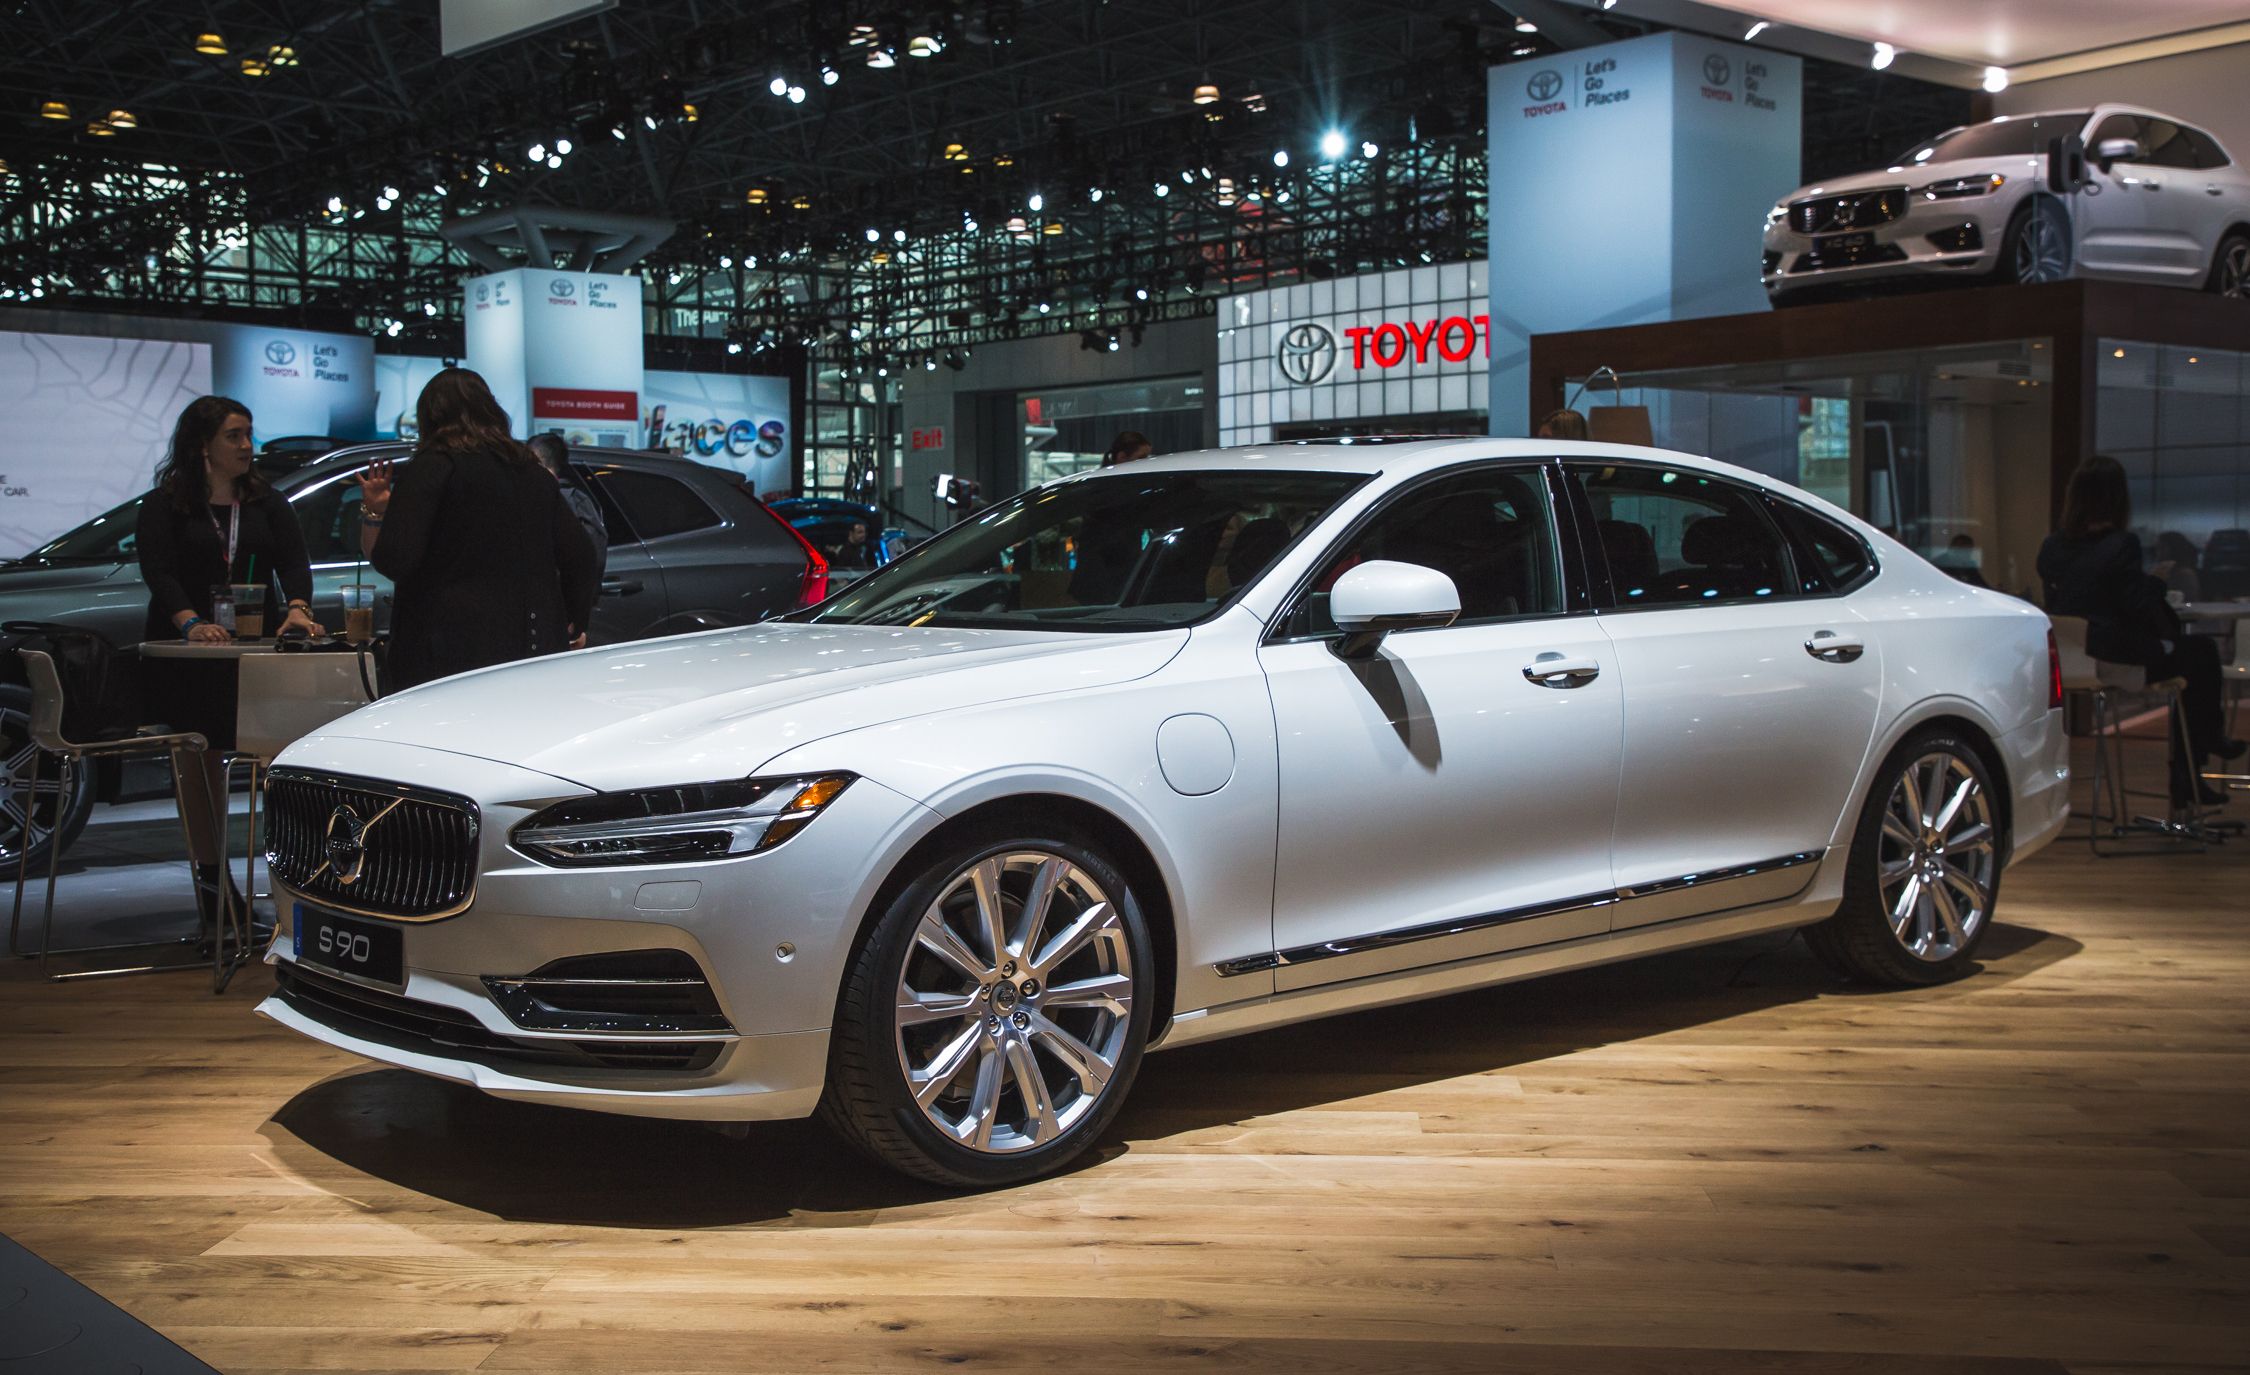 2018 Volvo S90 Stretches Out | News | Car and Driver